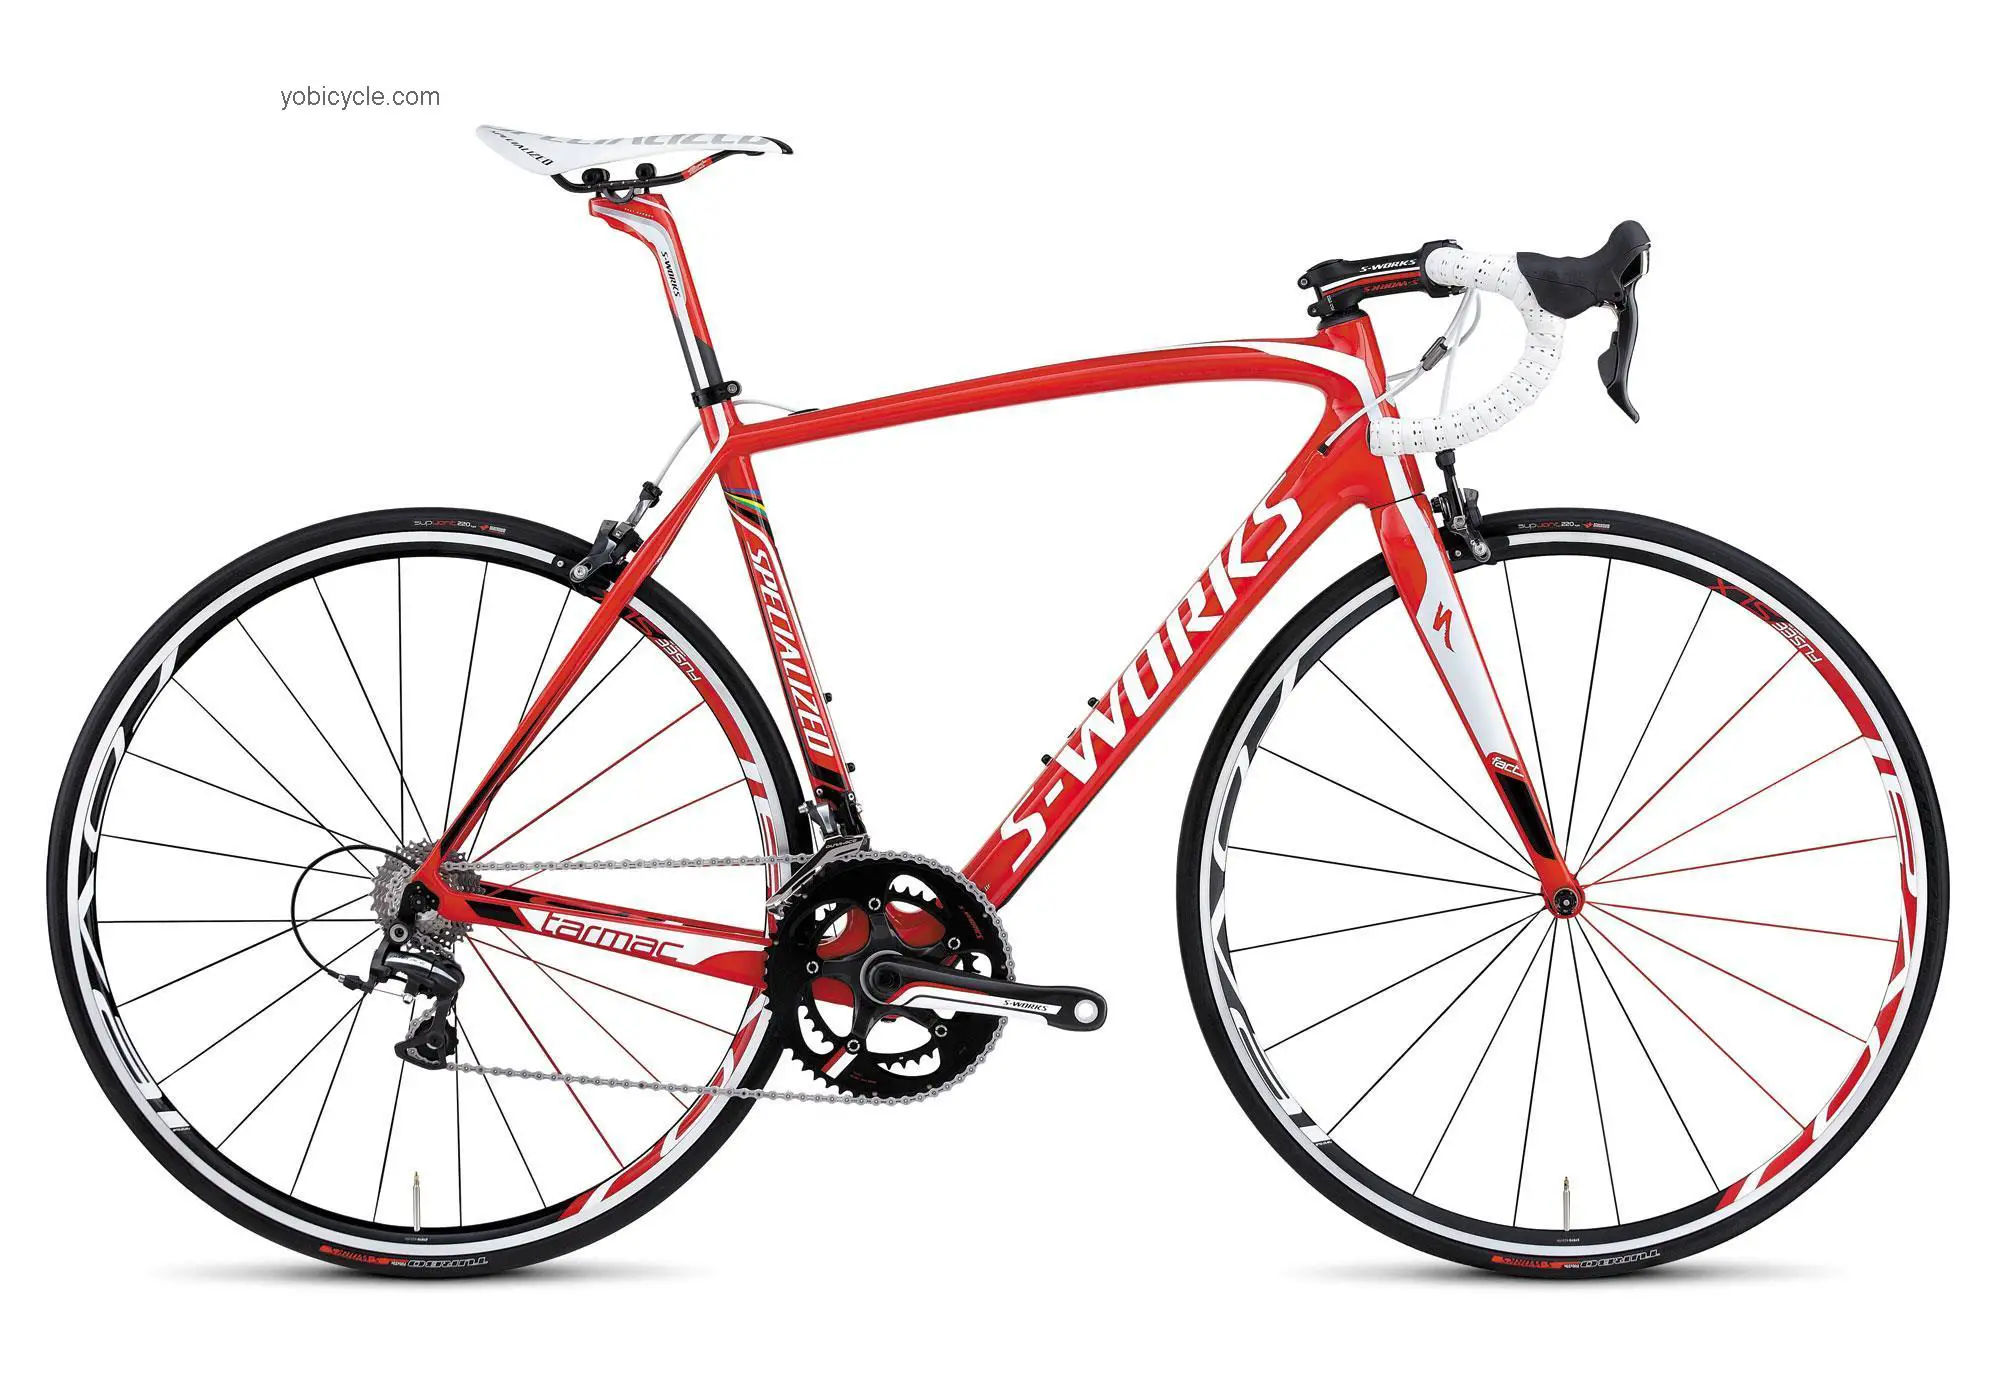 Specialized S-Works Tarmac SL4 Dura-Ace competitors and comparison tool online specs and performance